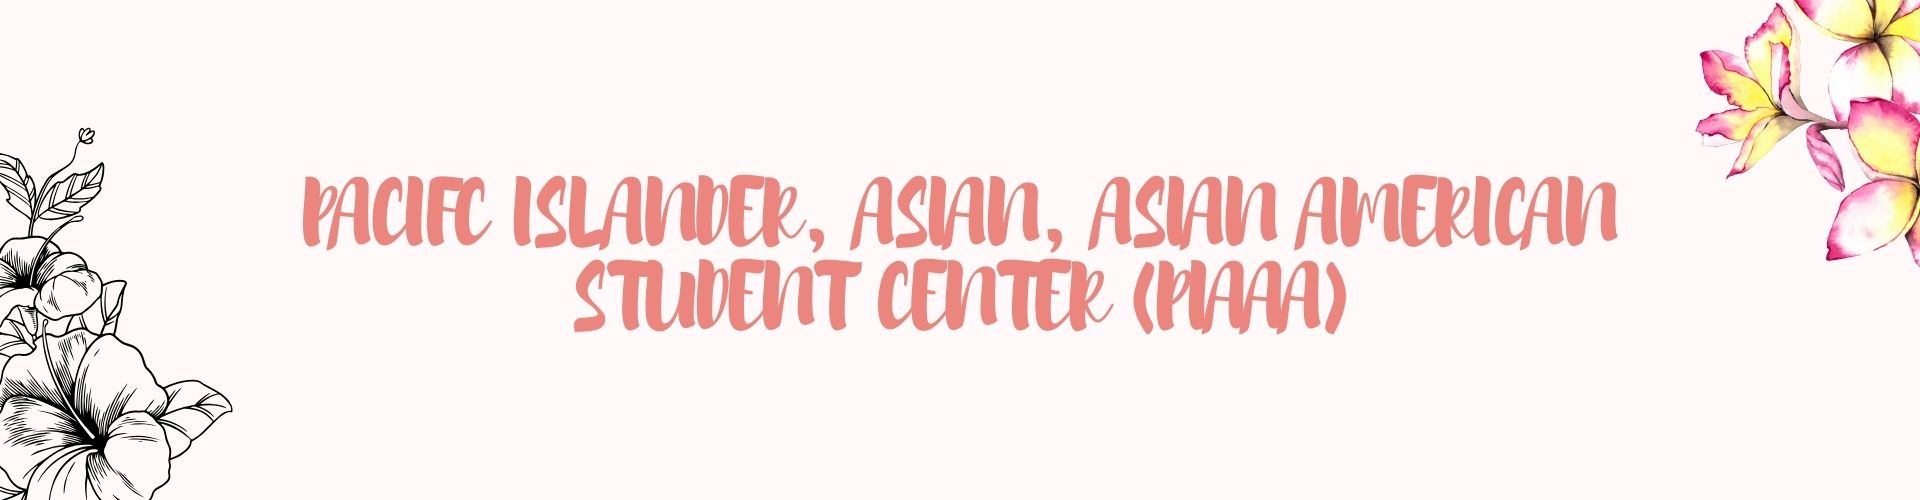 Pink "Pacific Islander, Asian & Asian American Student Center" text against a beige background with flowers in the corners